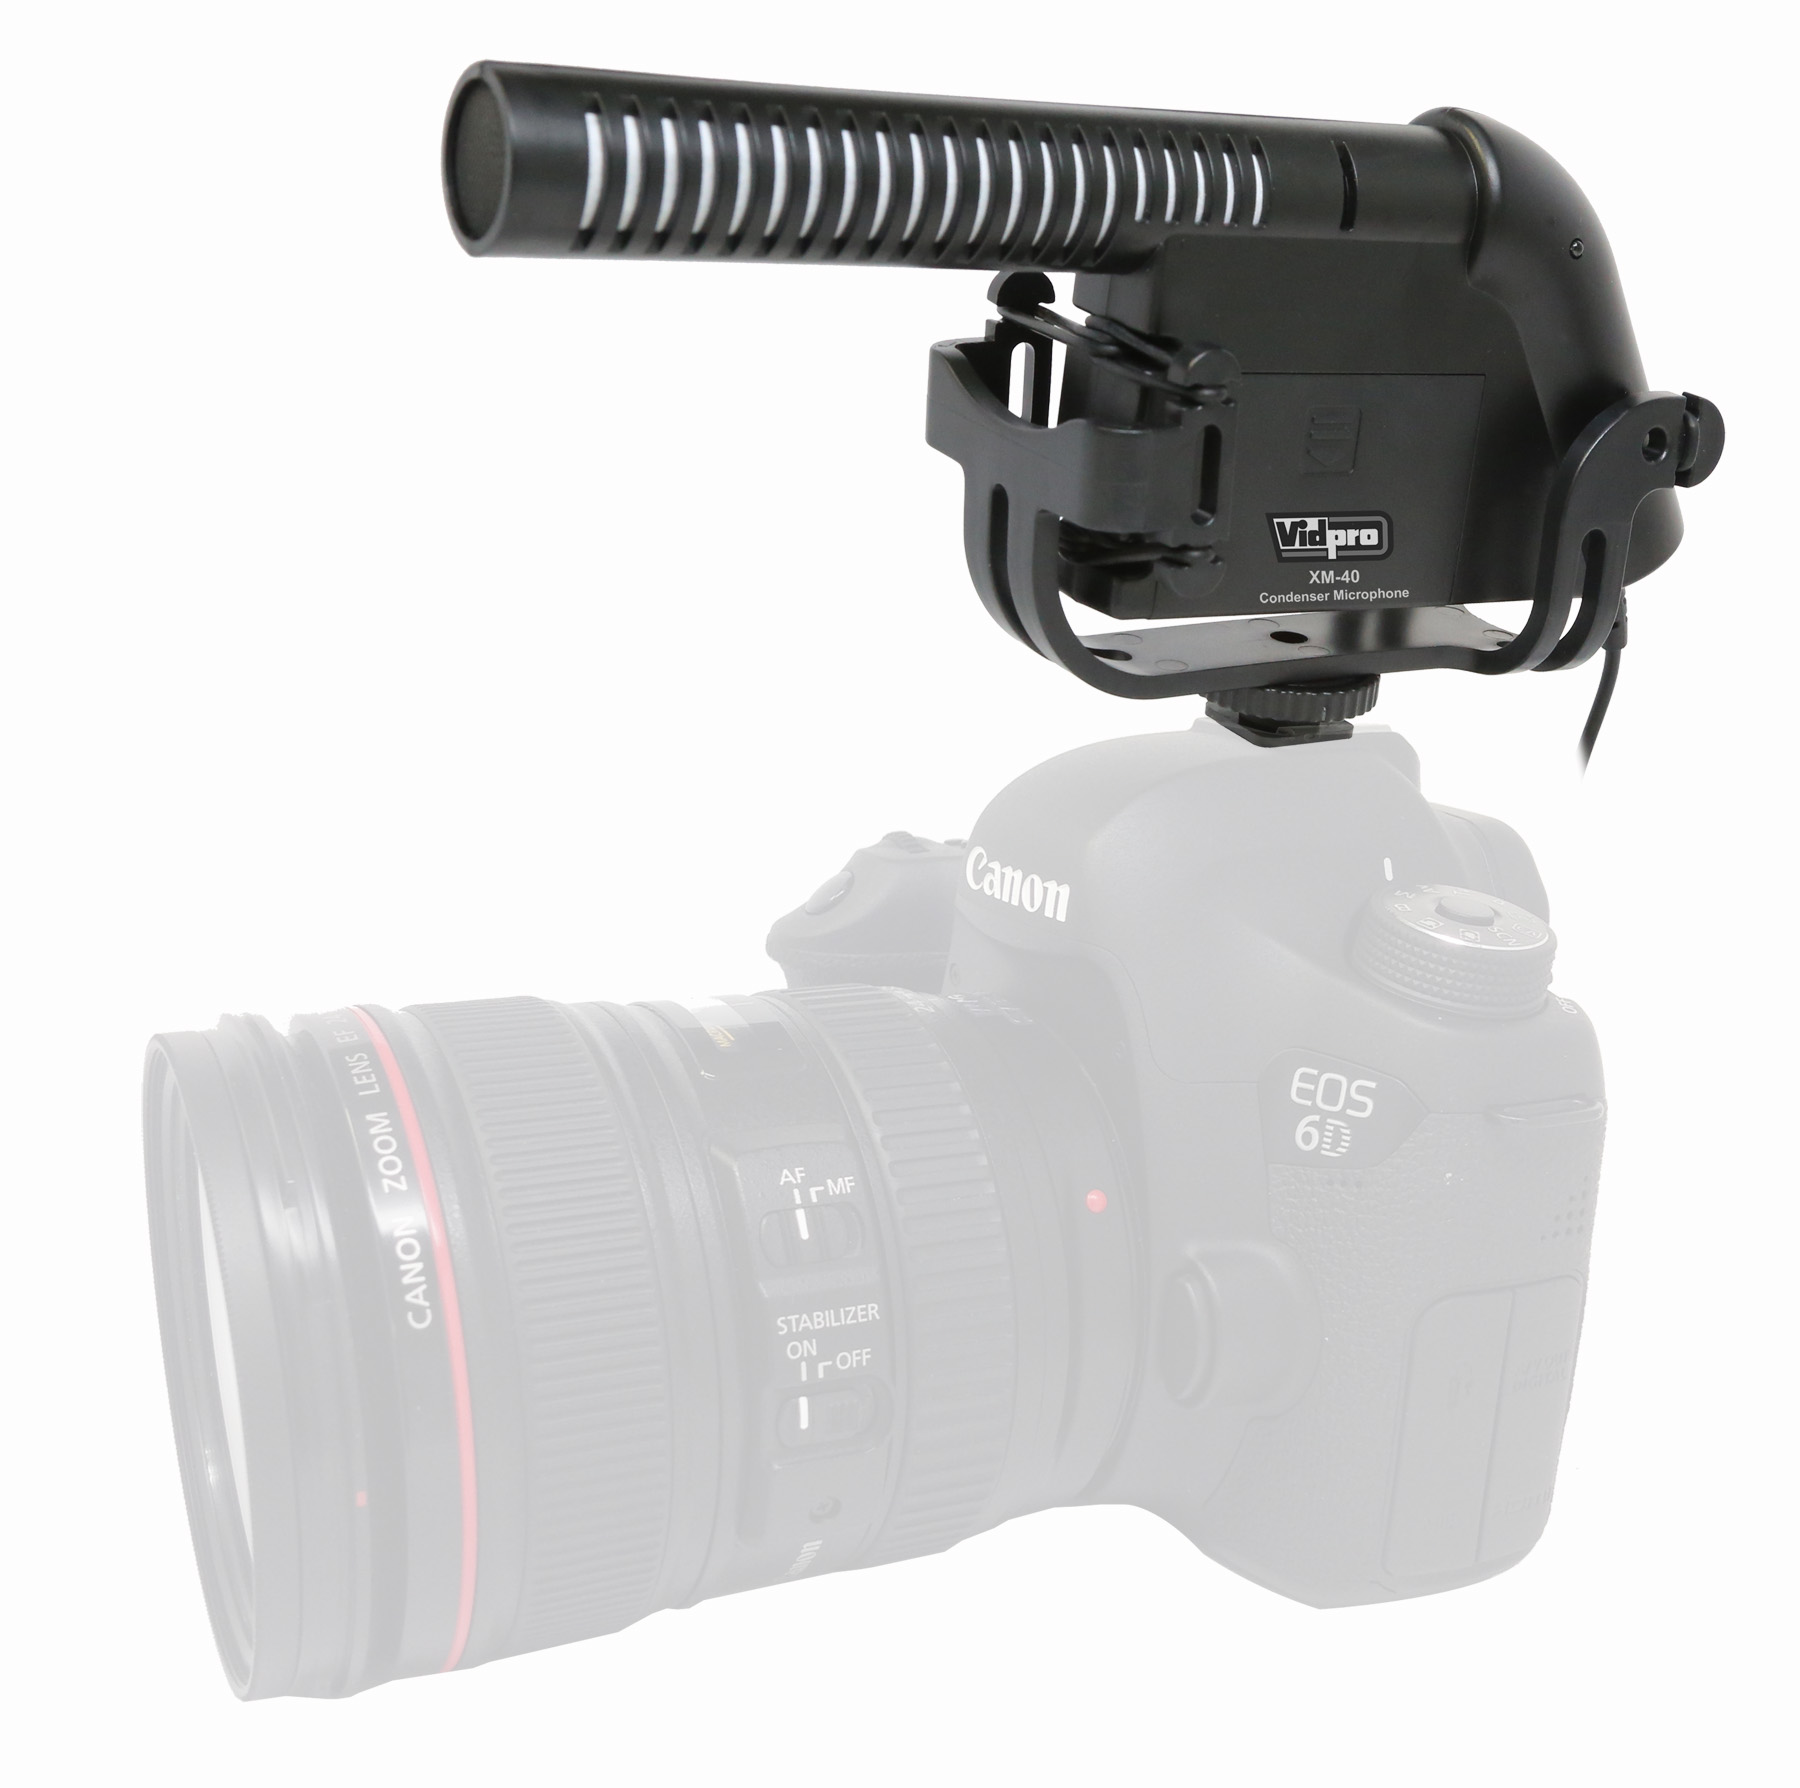 External Microphone for SonyCamcorder